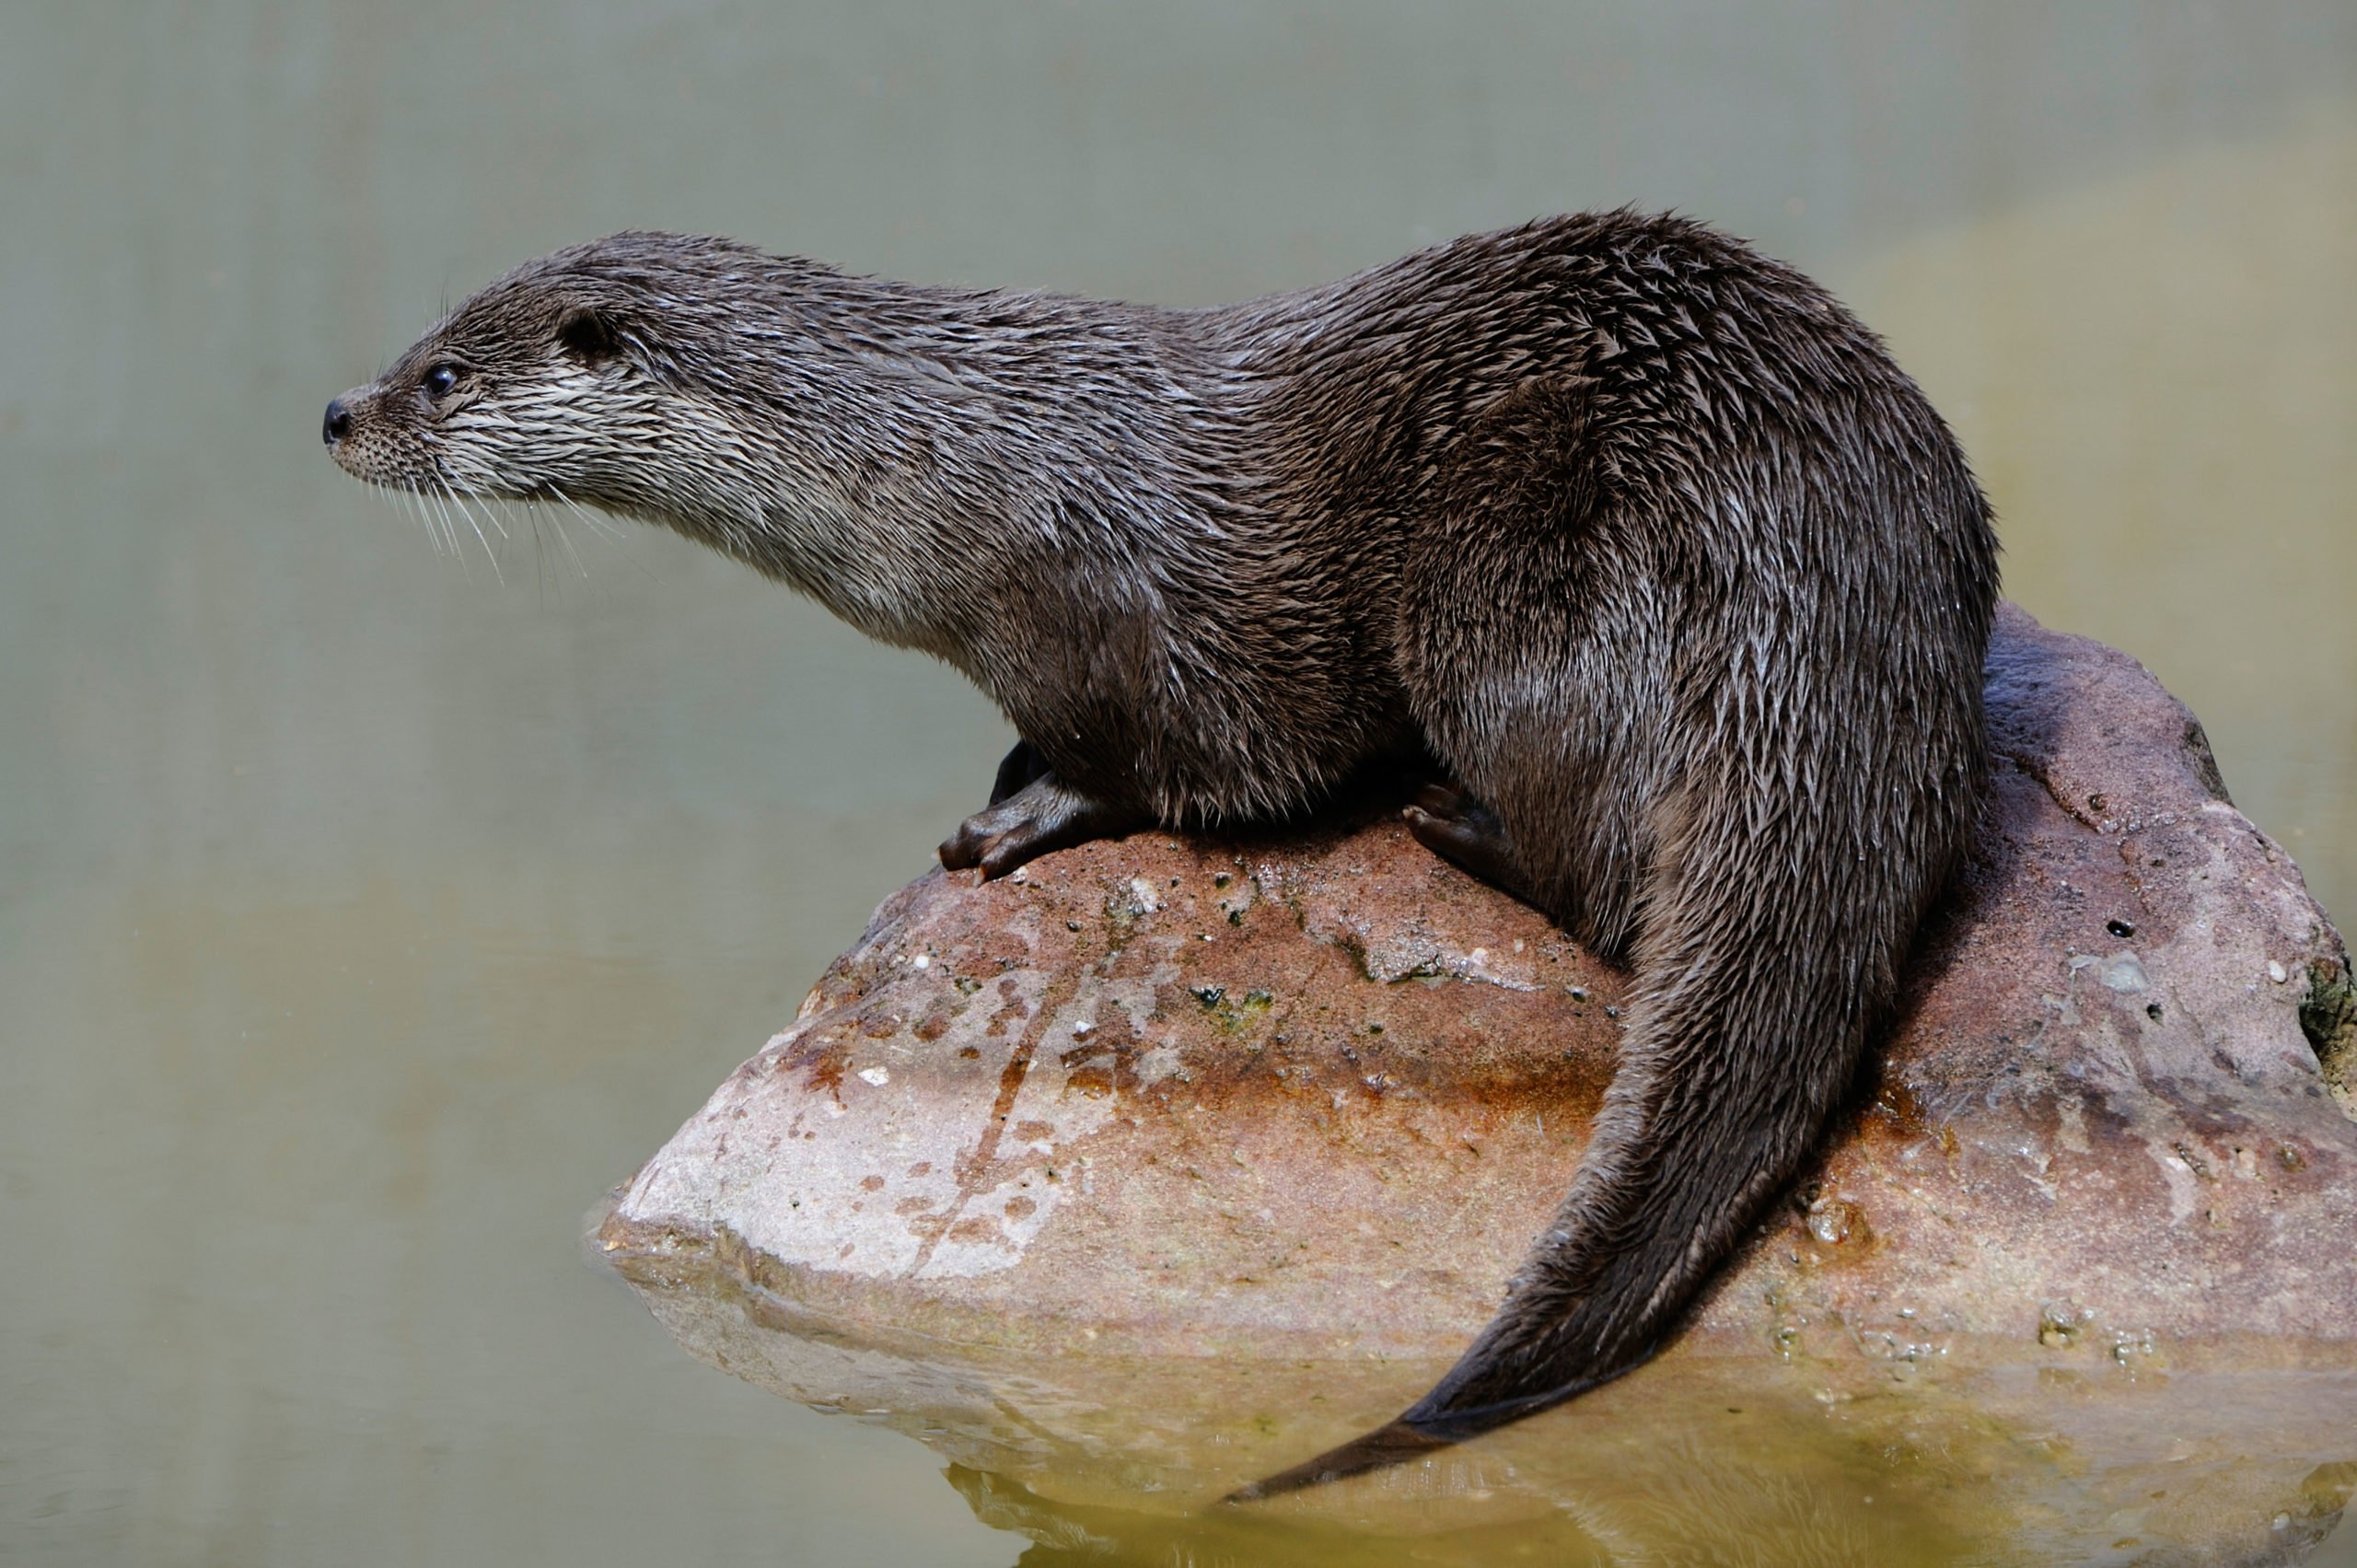 <p>The wildlife of northern Thailand’s rivers and forests, including the near-threatened Eurasian otter, could be disrupted by more dams on the Mekong (Image: Alamy)</p>